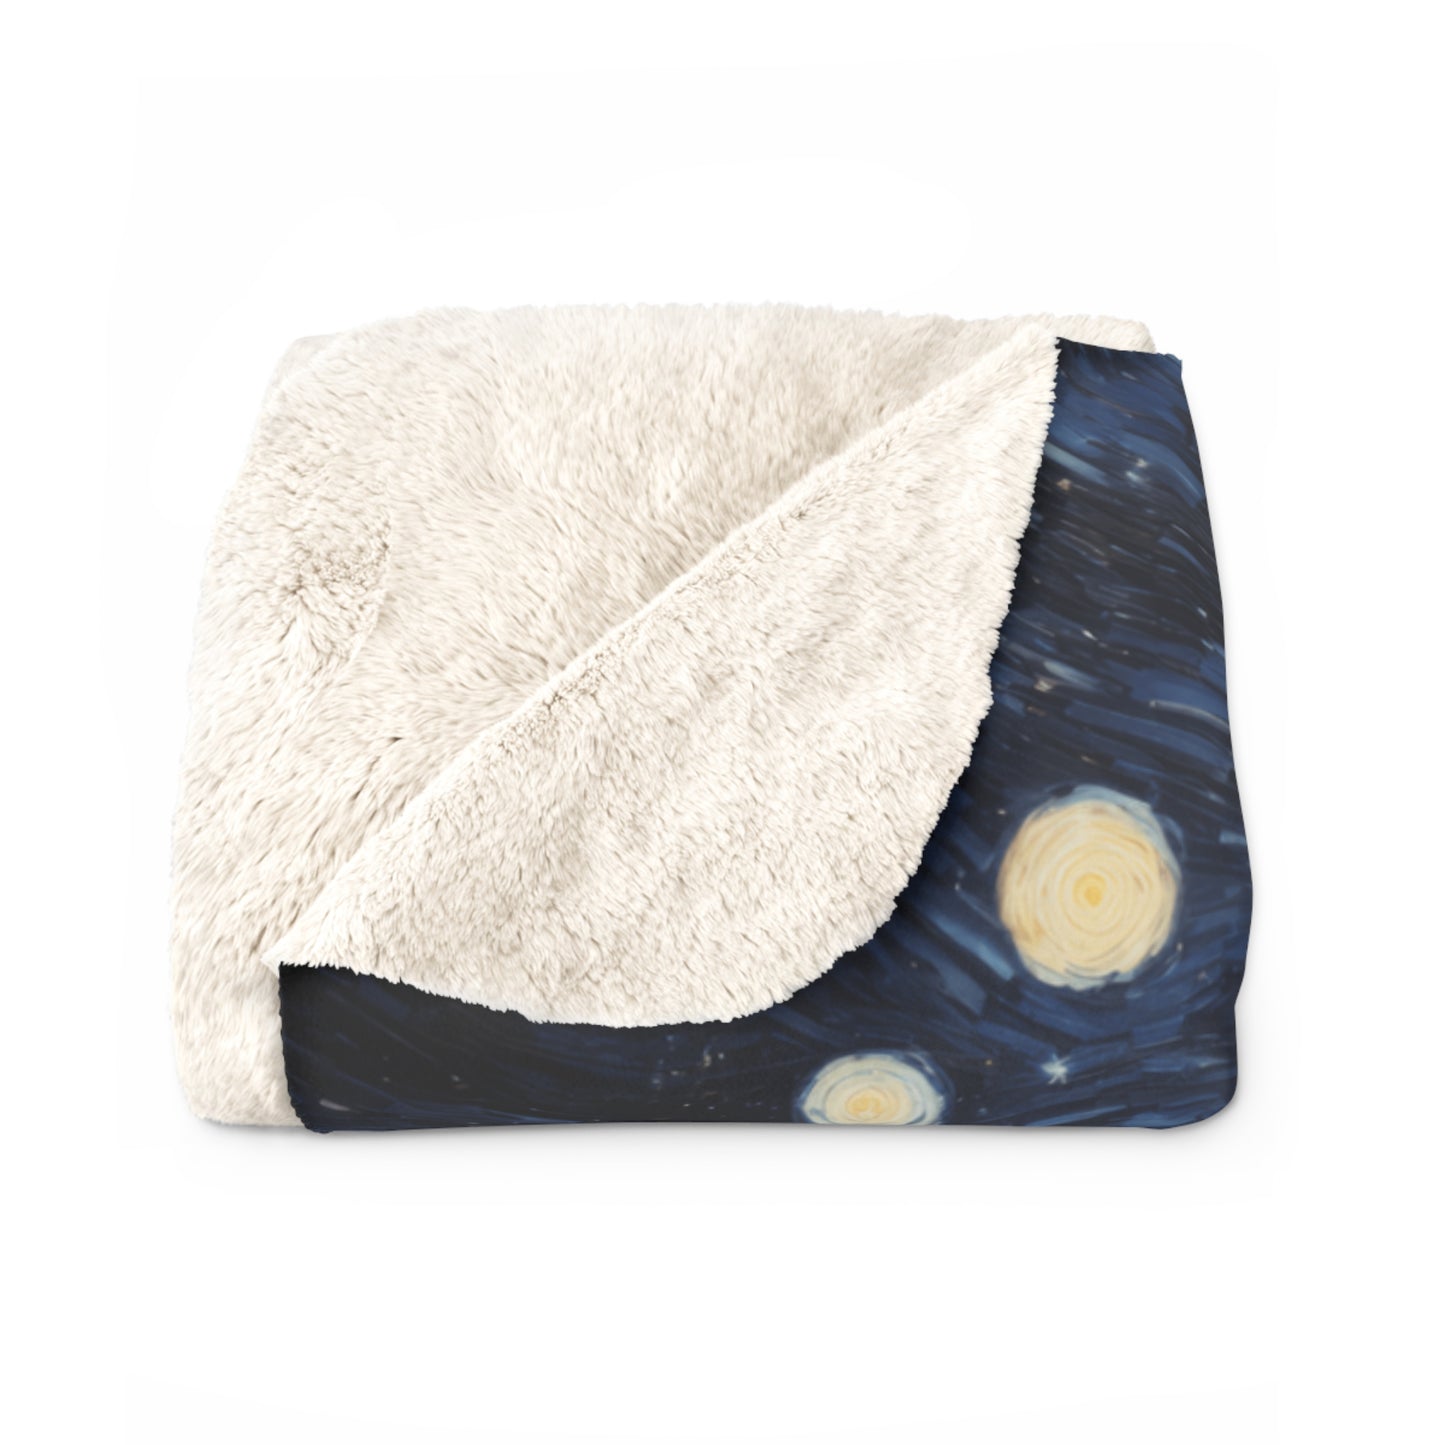 Bryce Canyon National Park Sherpa Blanket - The Starry Night